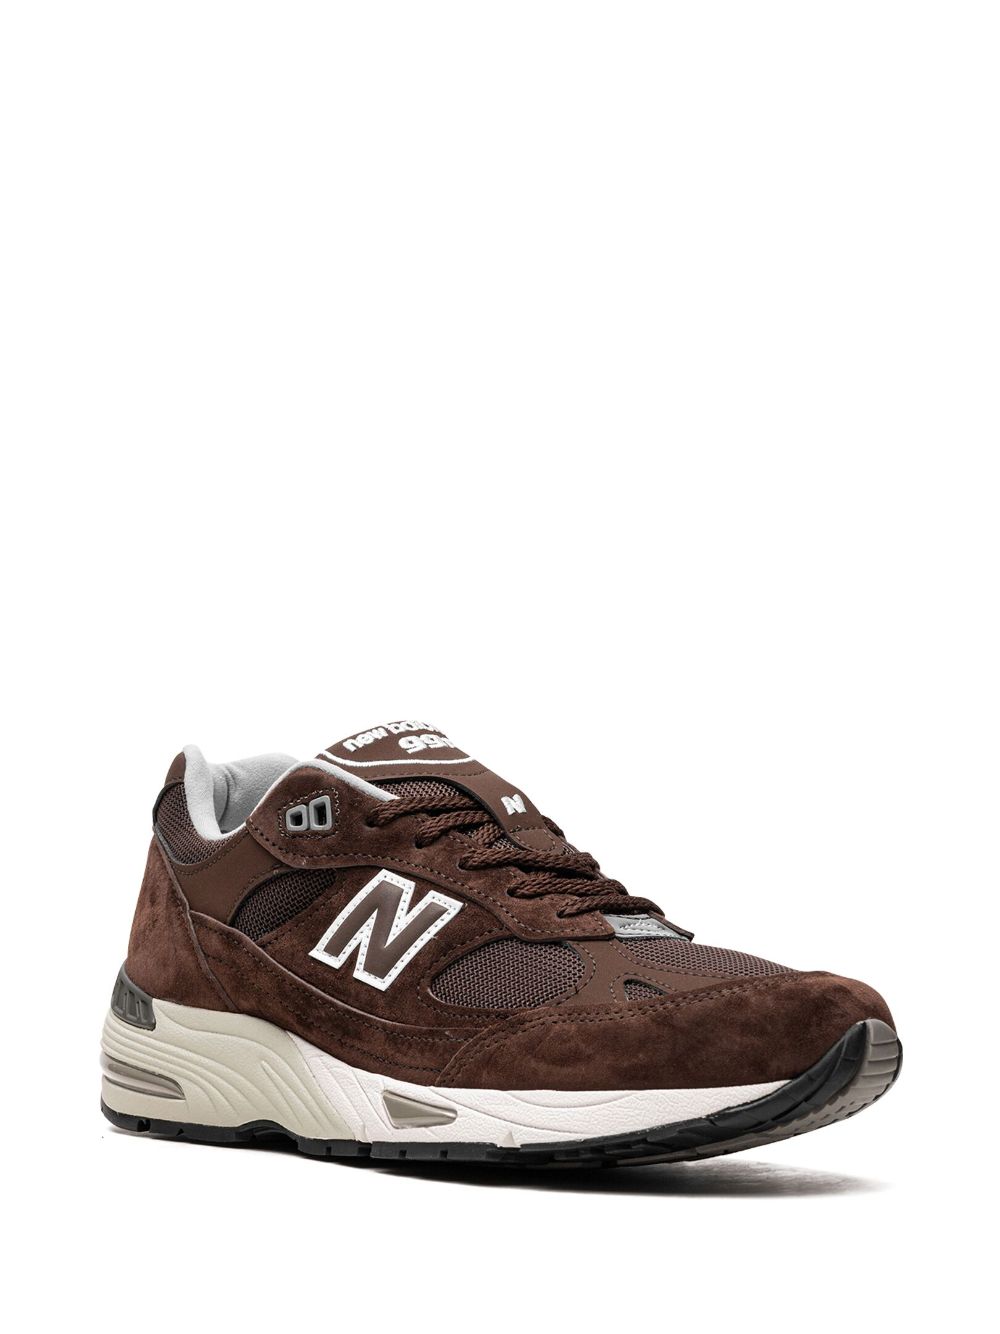 Shop New Balance 991 "made In Uk In Brown